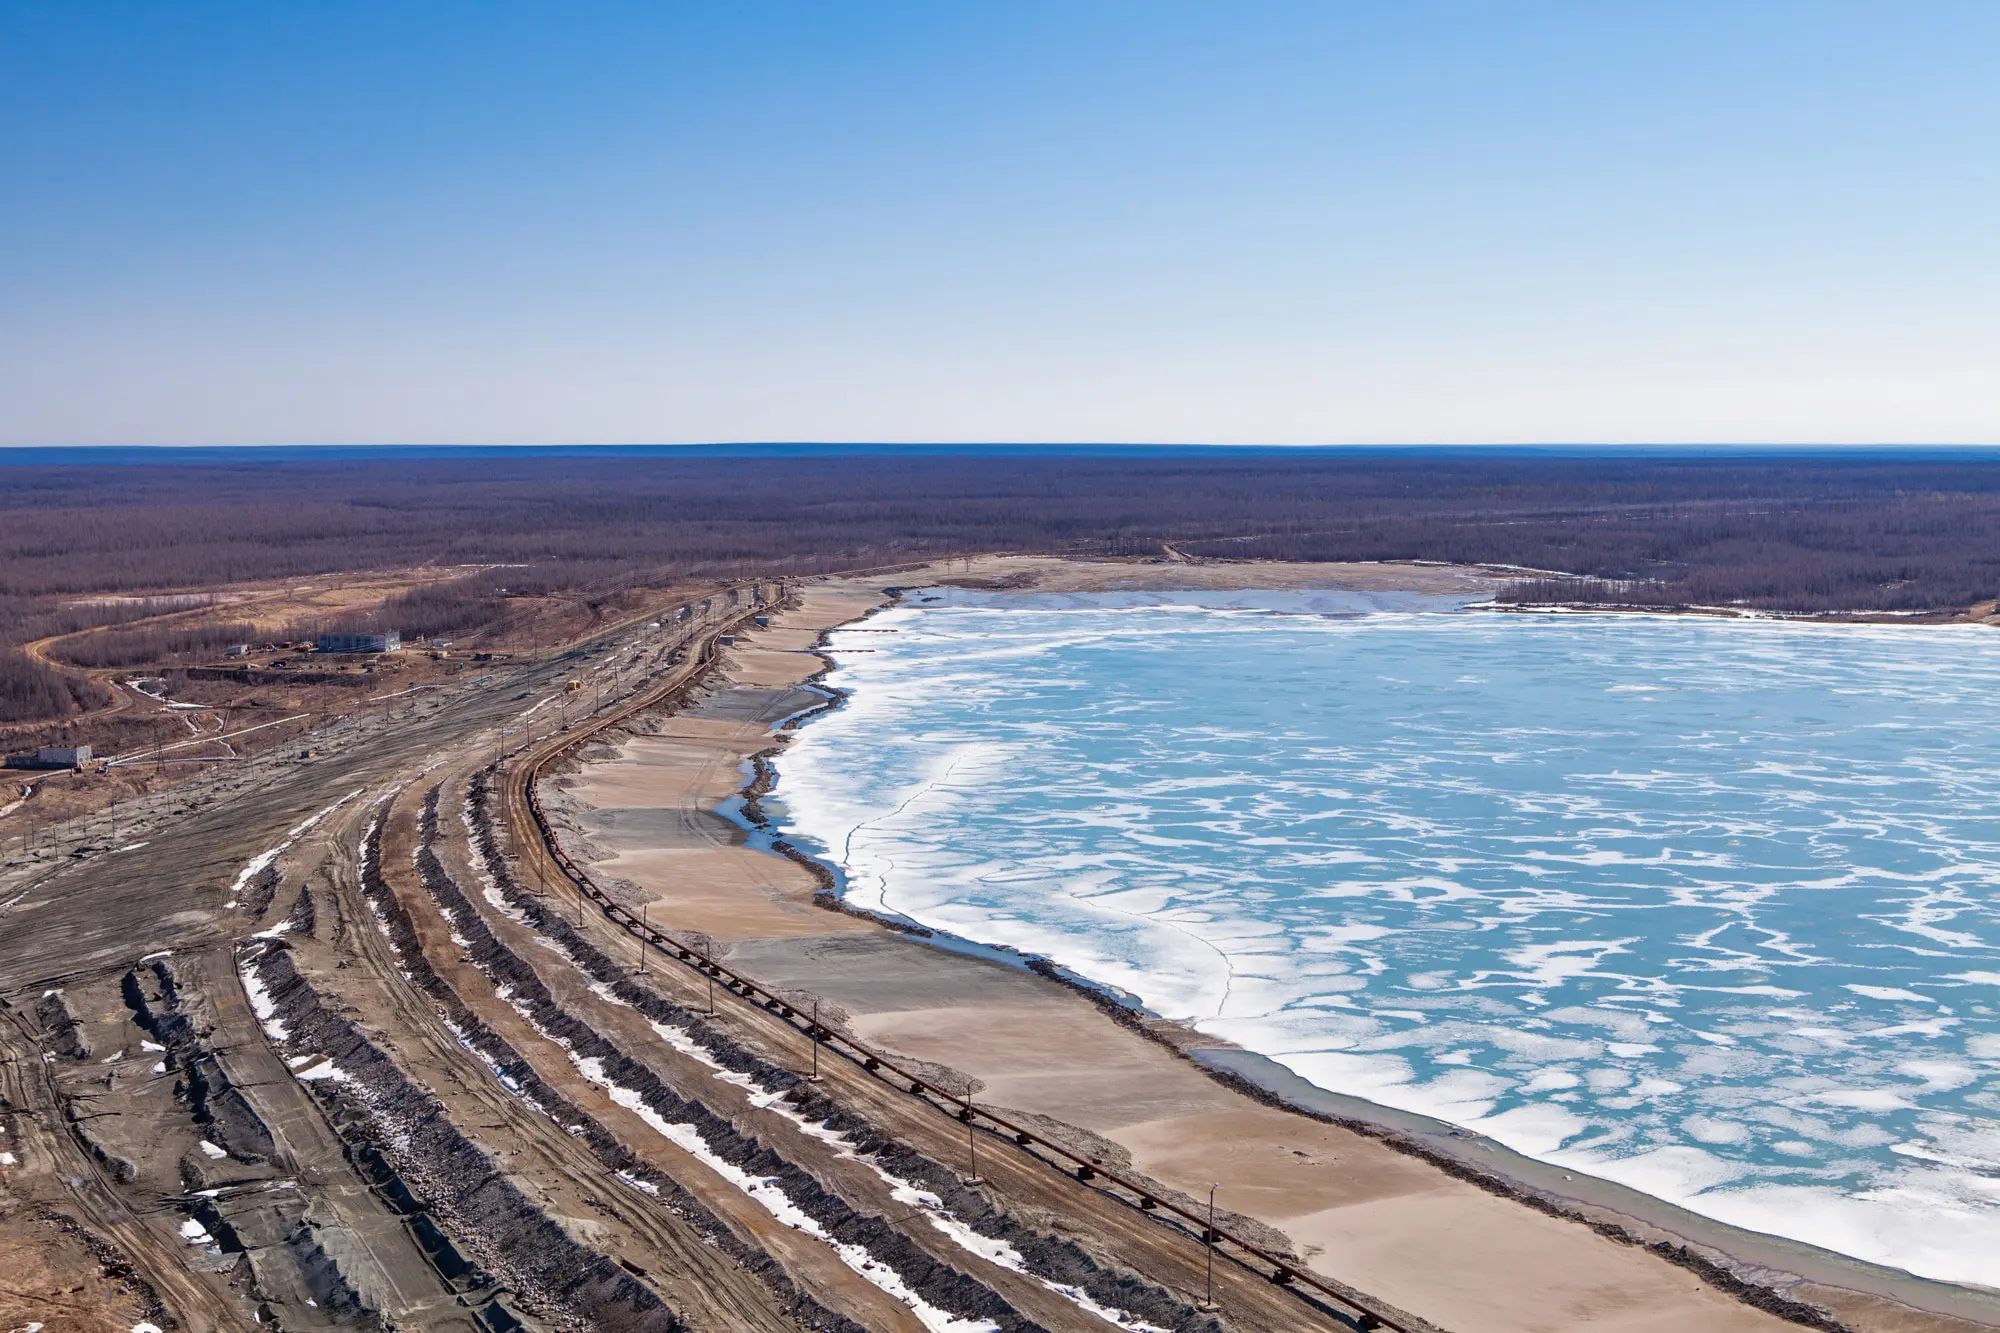 How free flow of data can make Tailings Storage Facilities safer